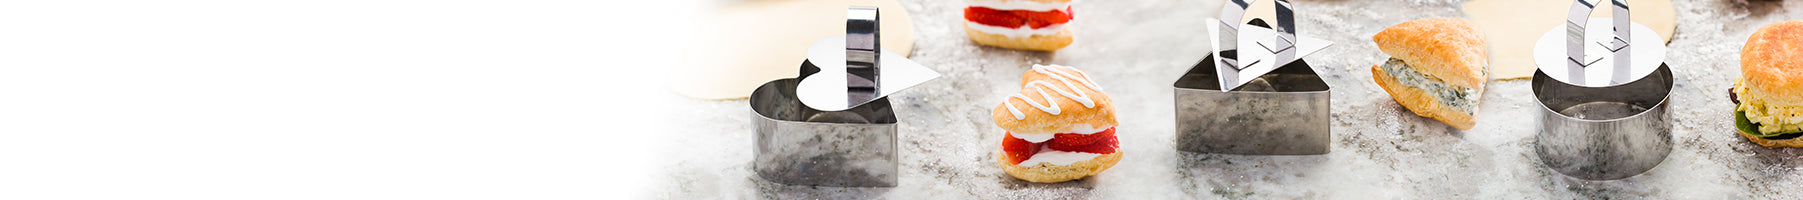 Banner_Smallwares_Bakeware_Cookie-Cutters_327